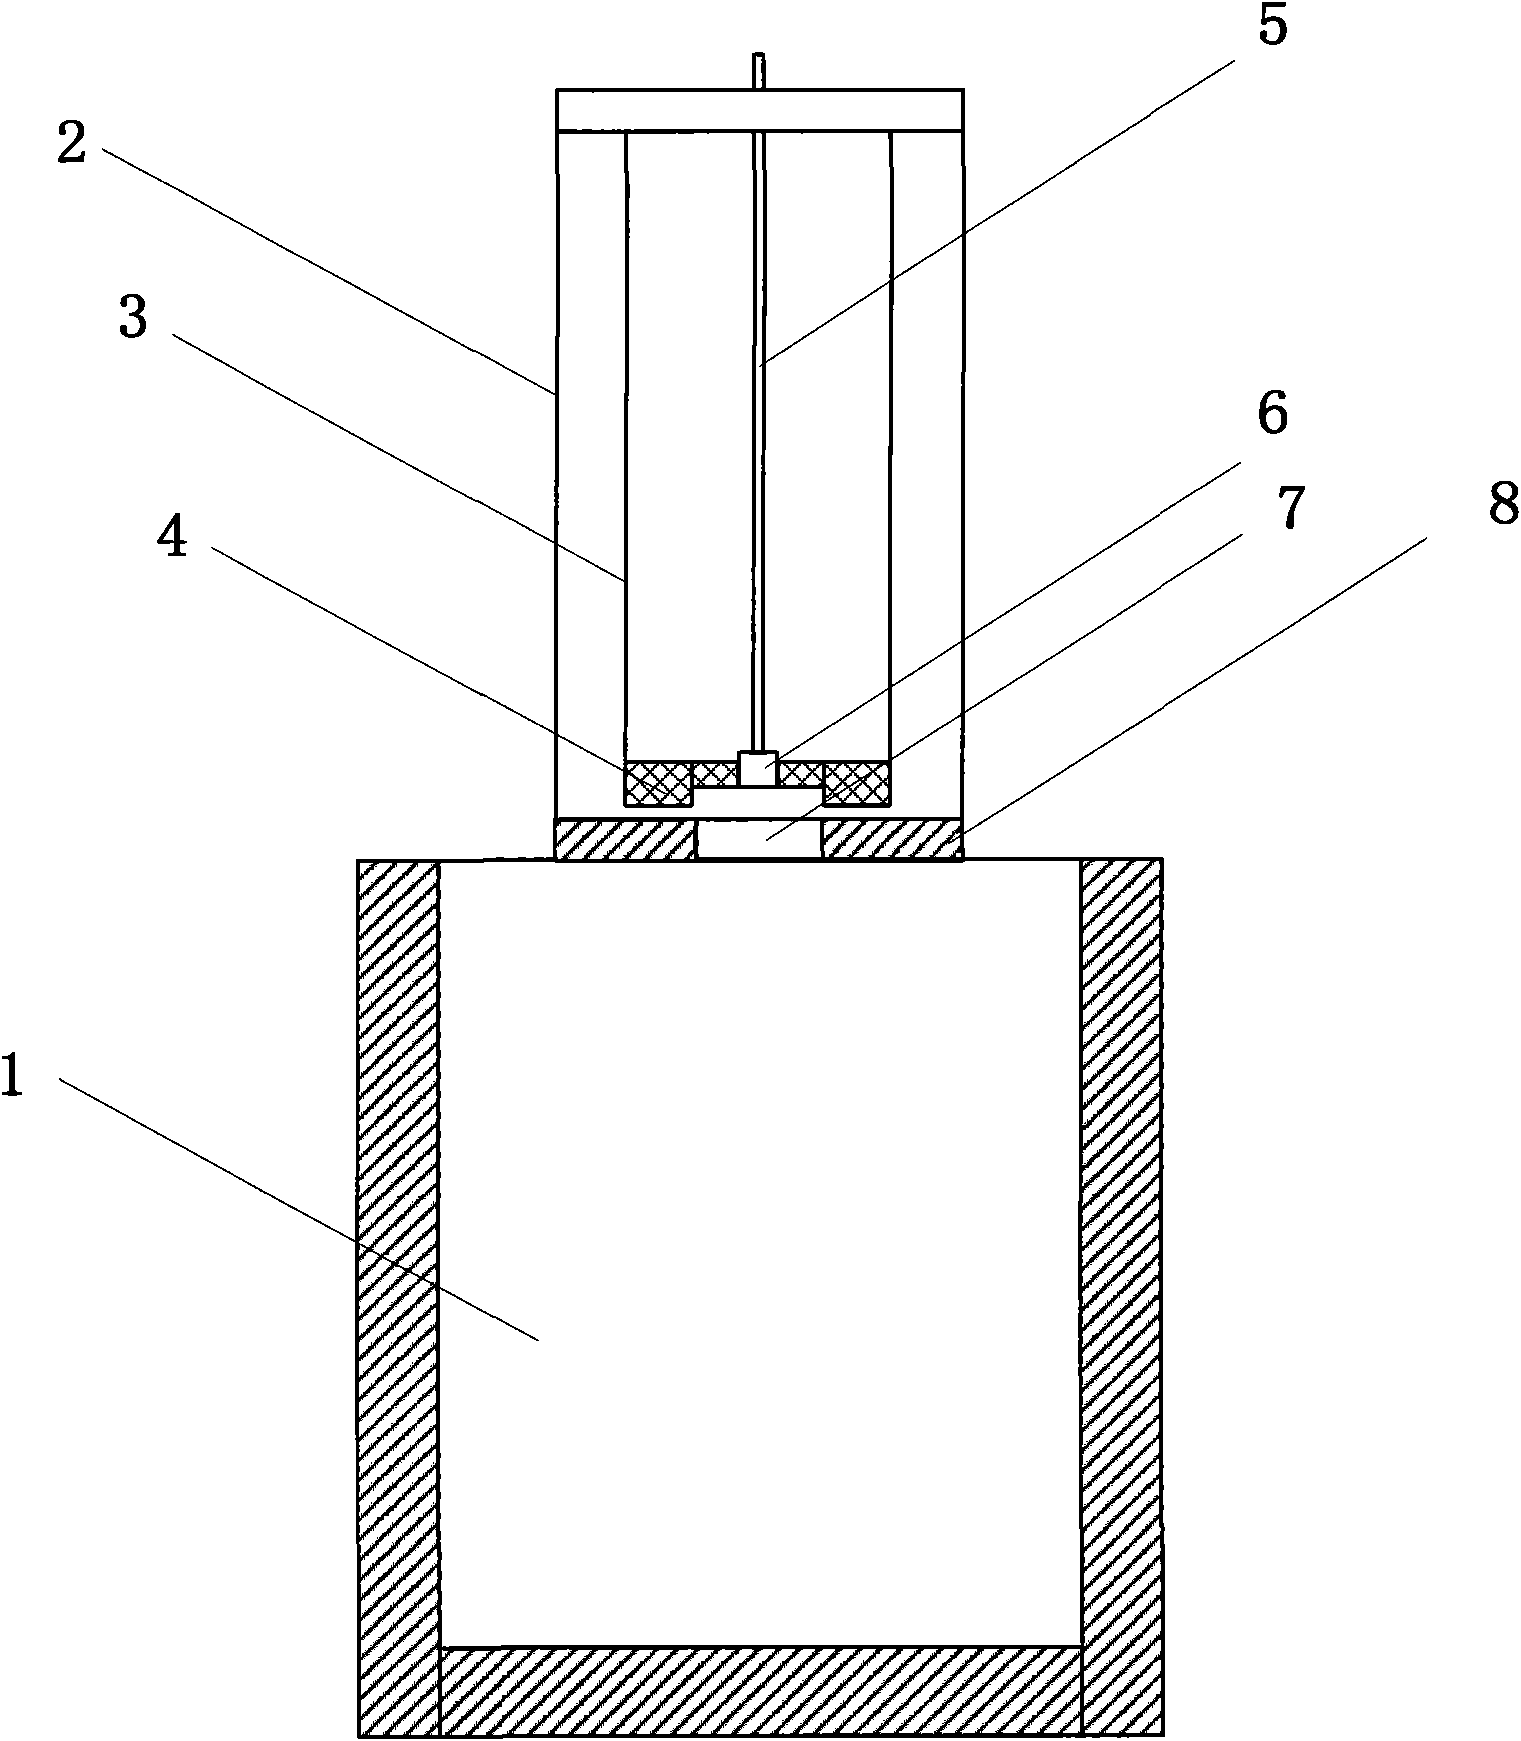 System for measuring normal spectral emissivity of high-temperature material